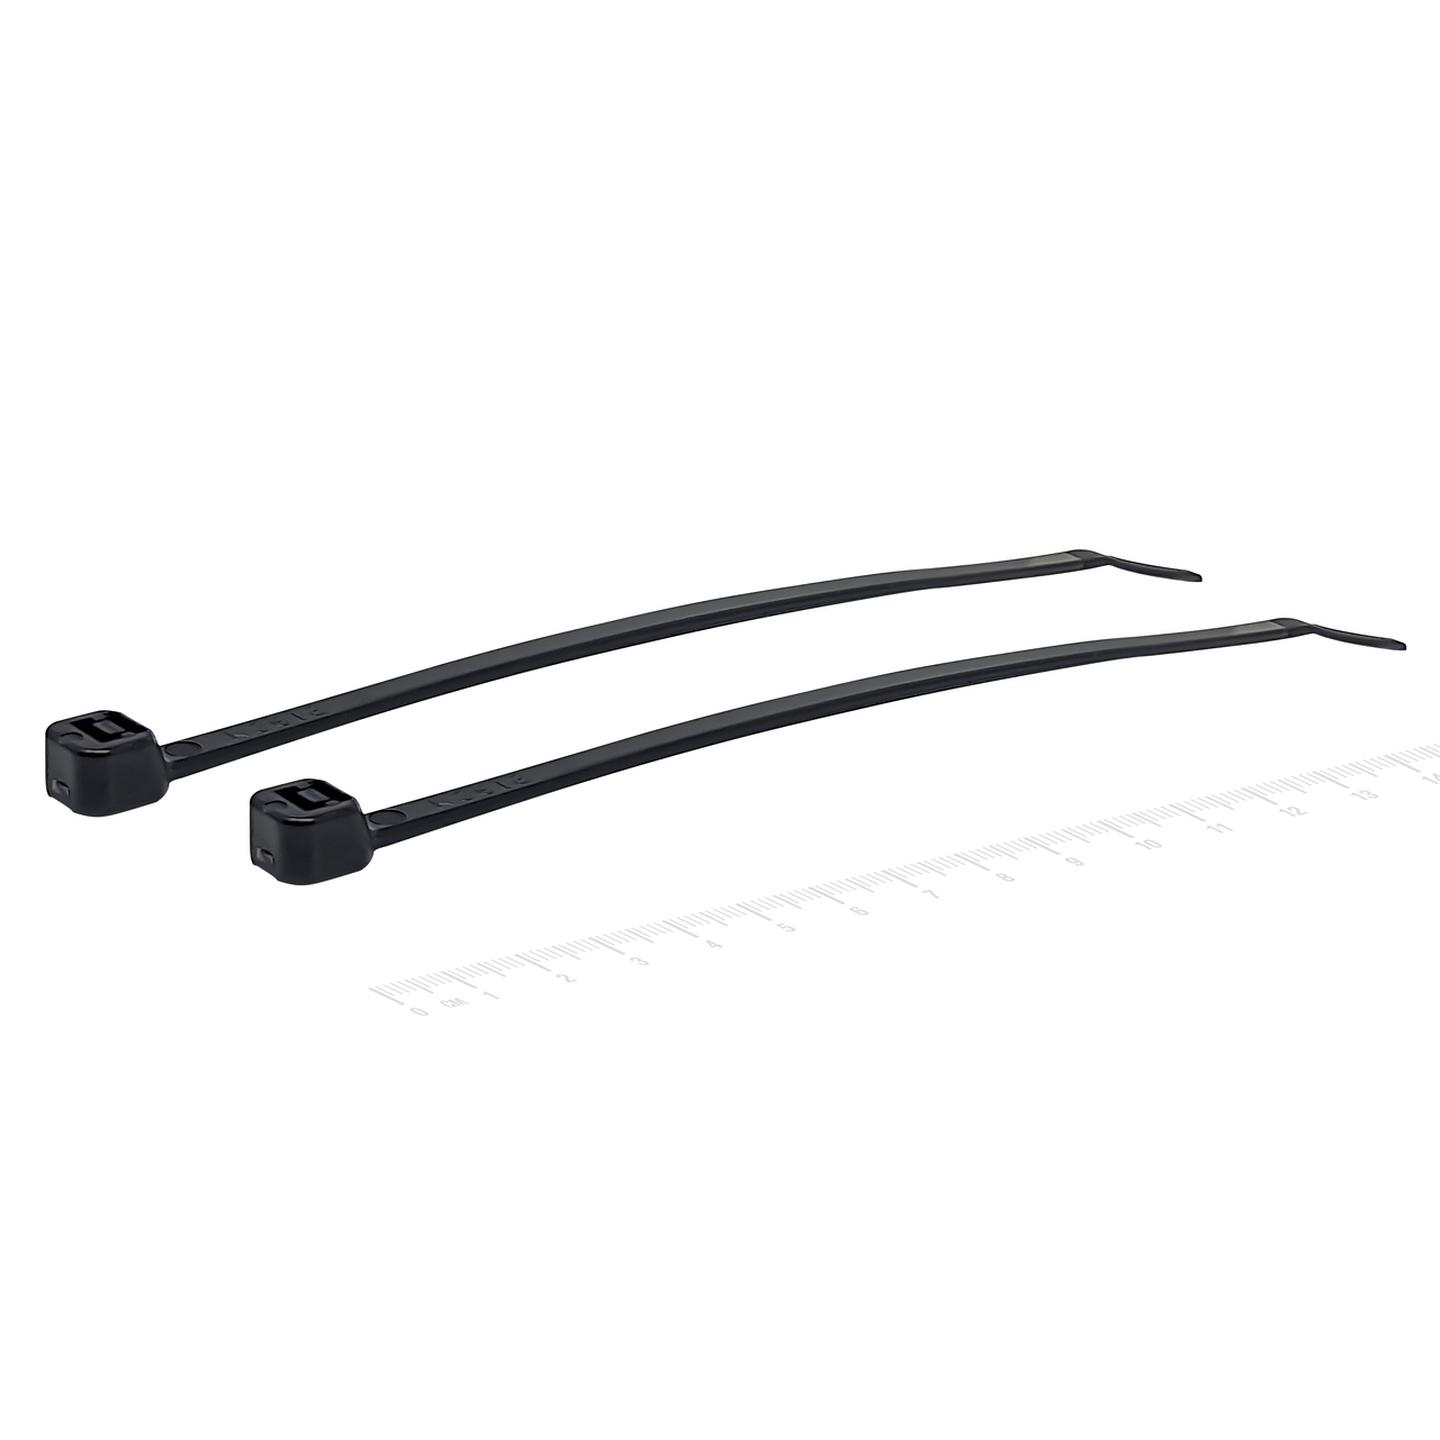 150mm Black Cable Ties - Pack of 15